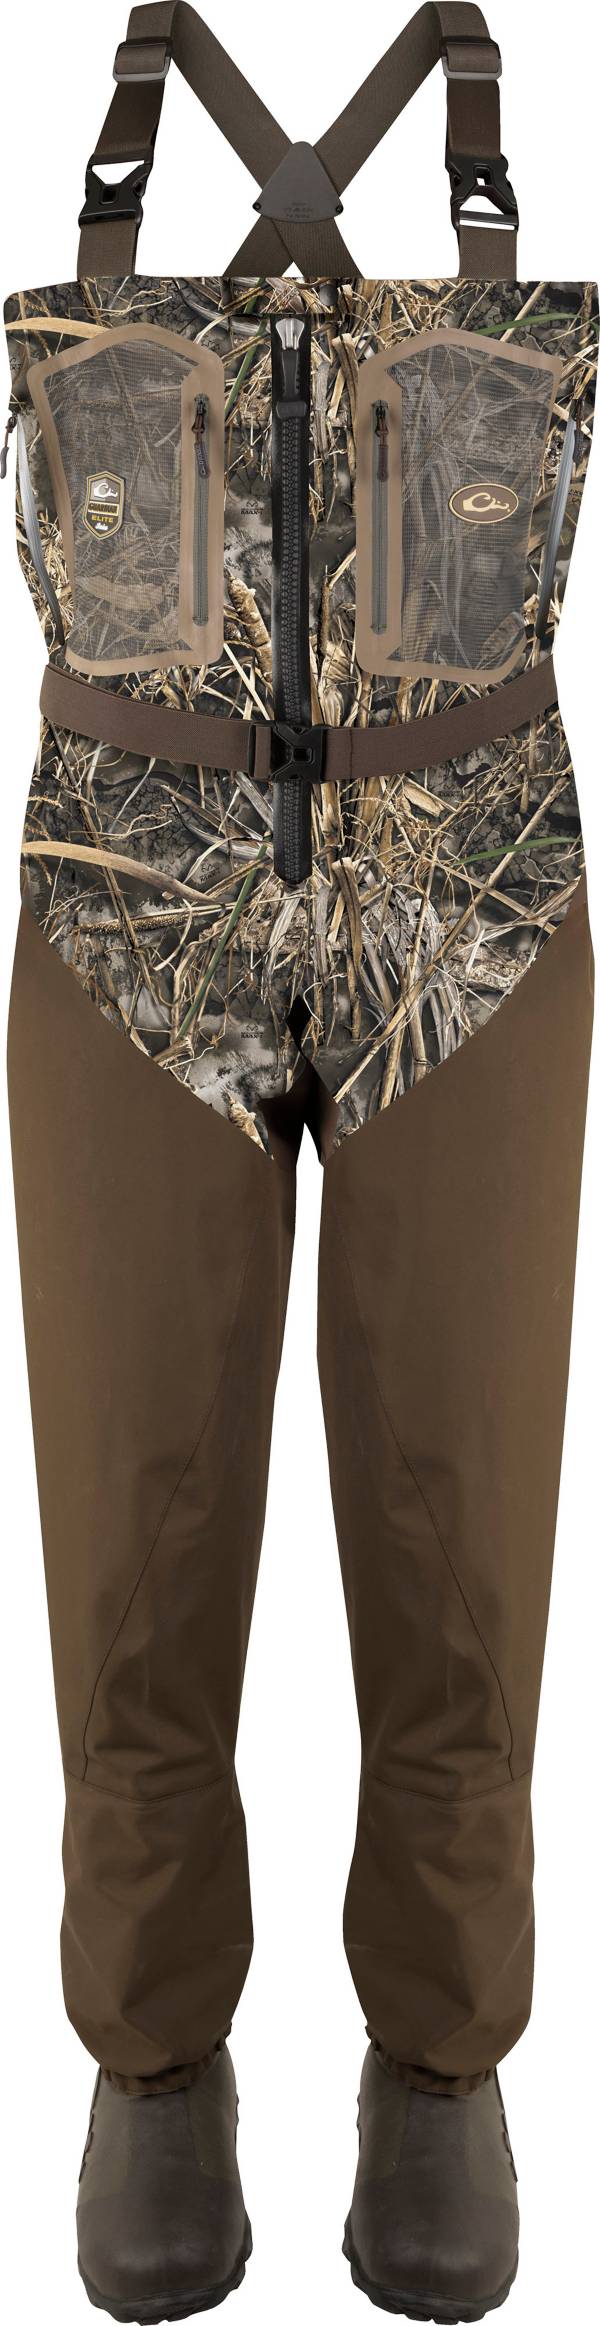 Drake Zip Guardian Elite 4-Layer Wader with Tear-Away Liner product image